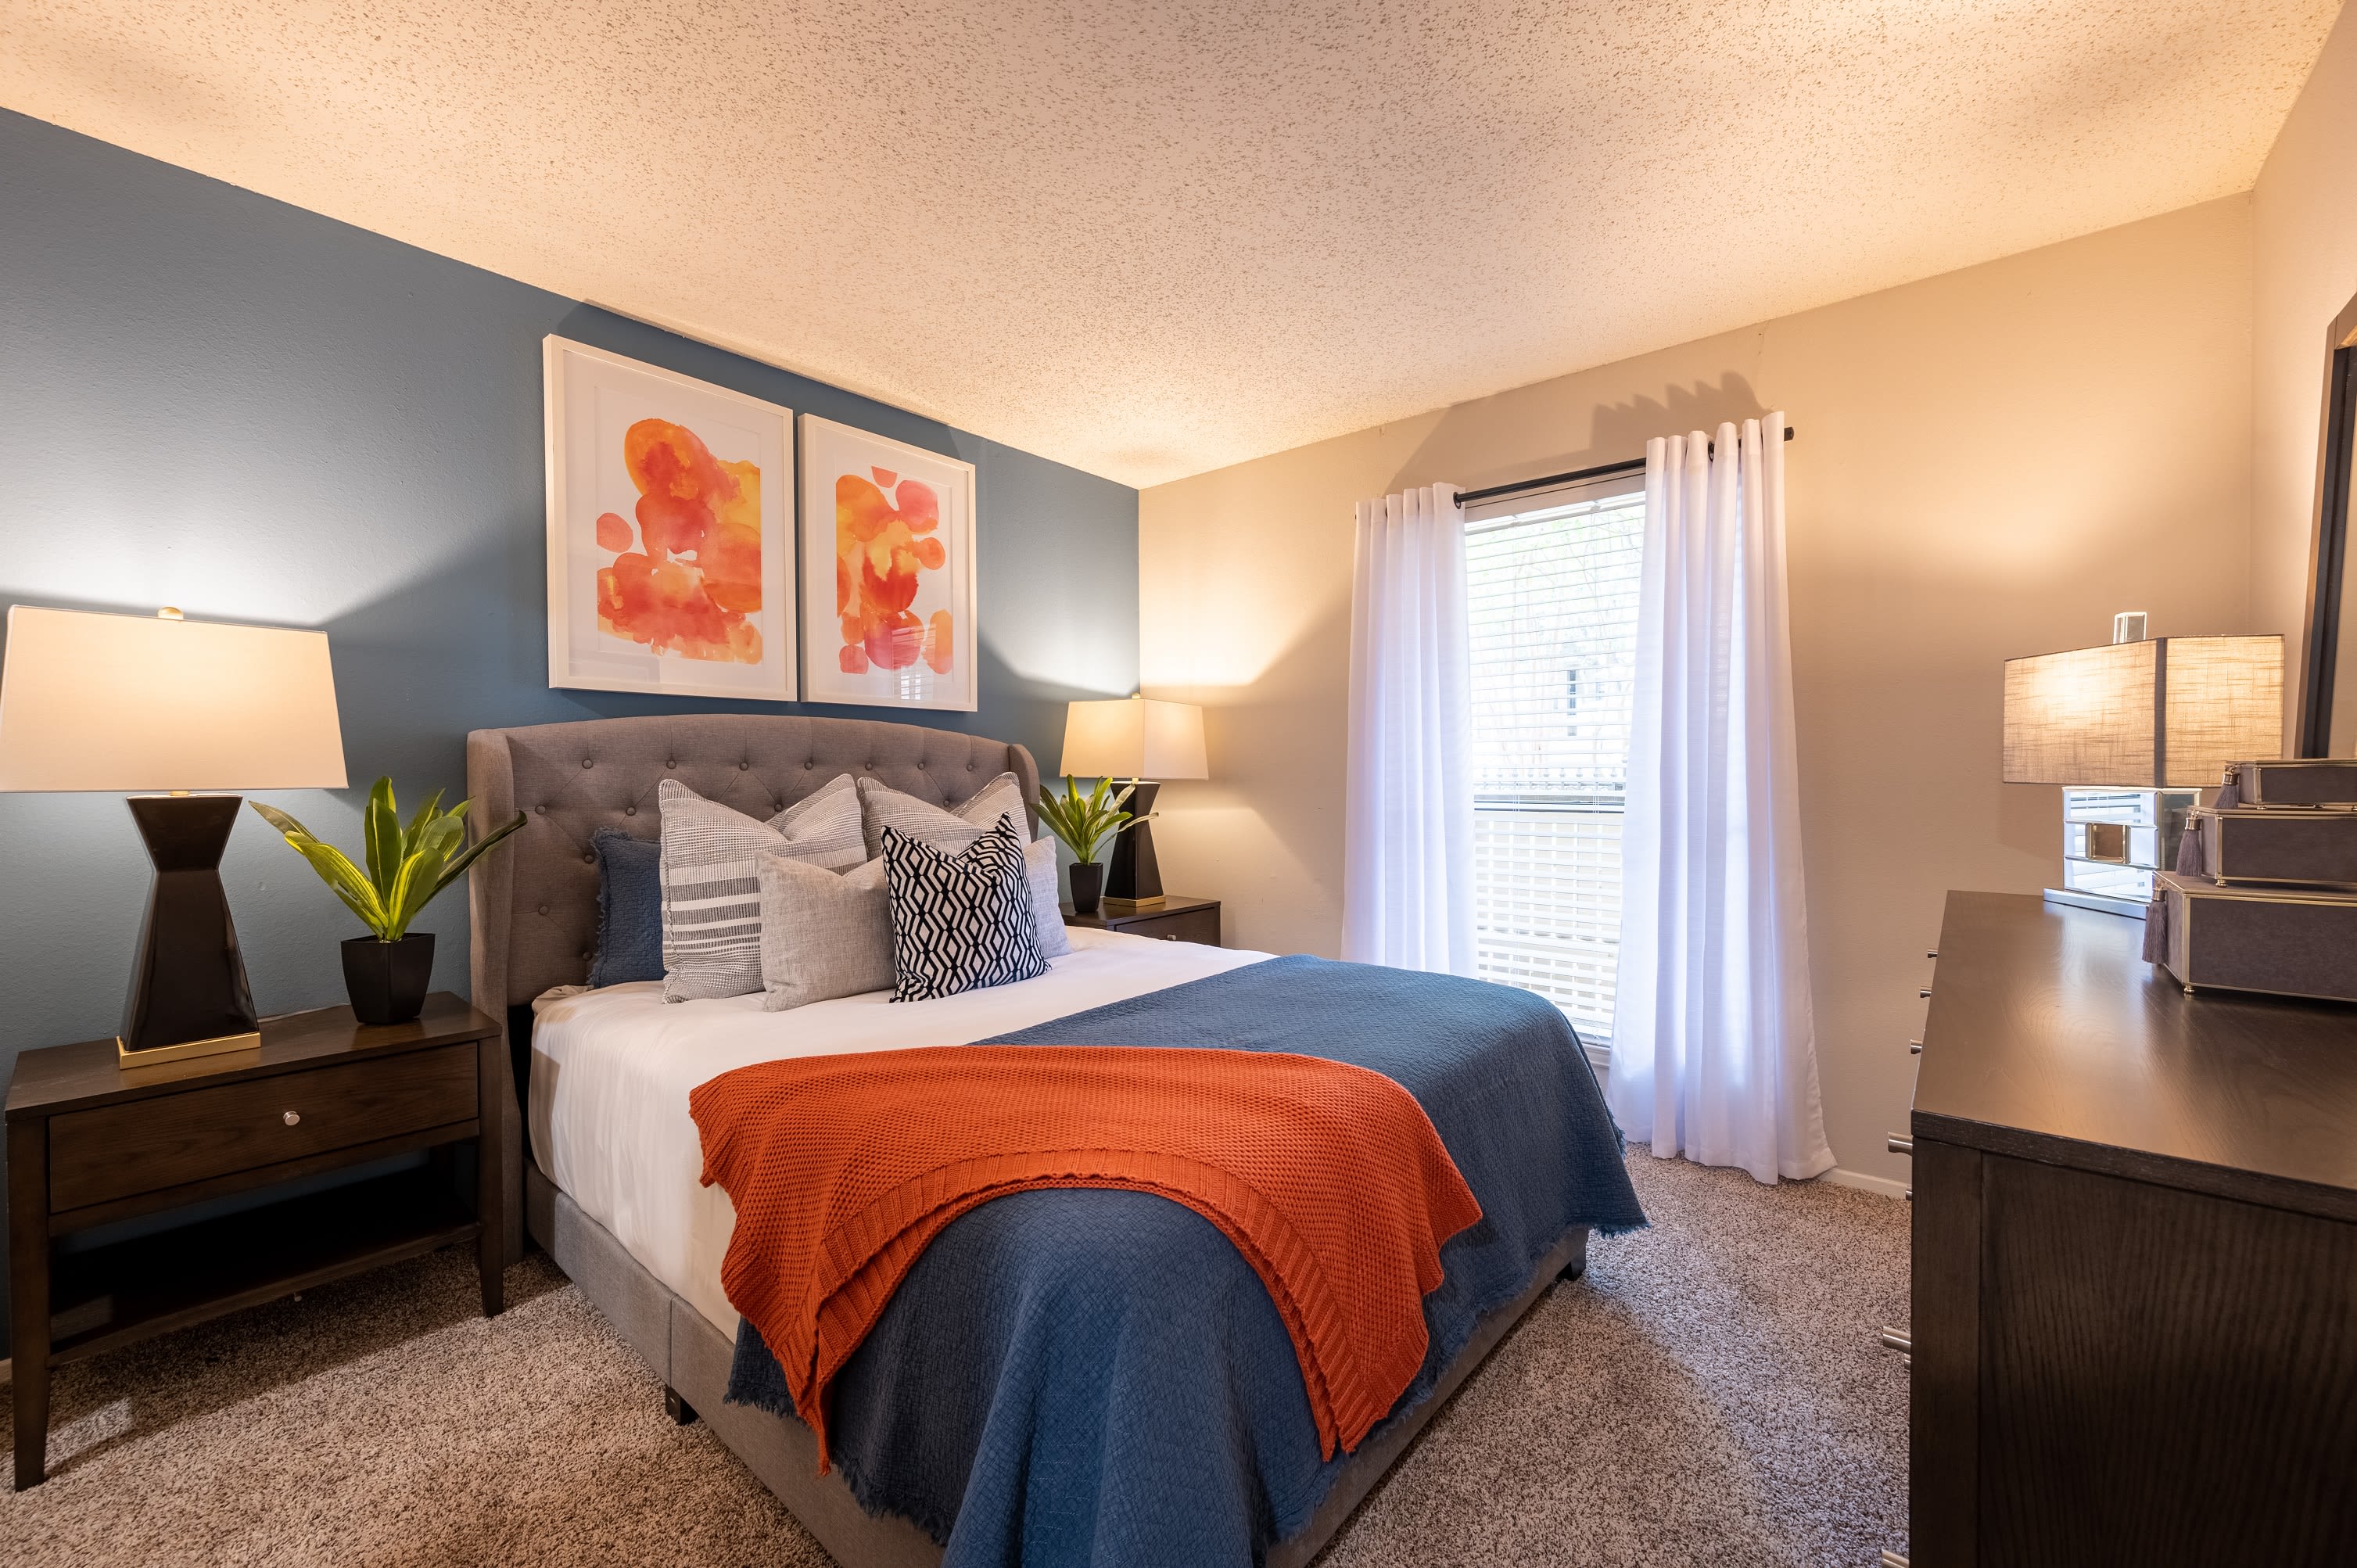 A well decorated model bedroom at Canopy on Central in Bedford, Texas